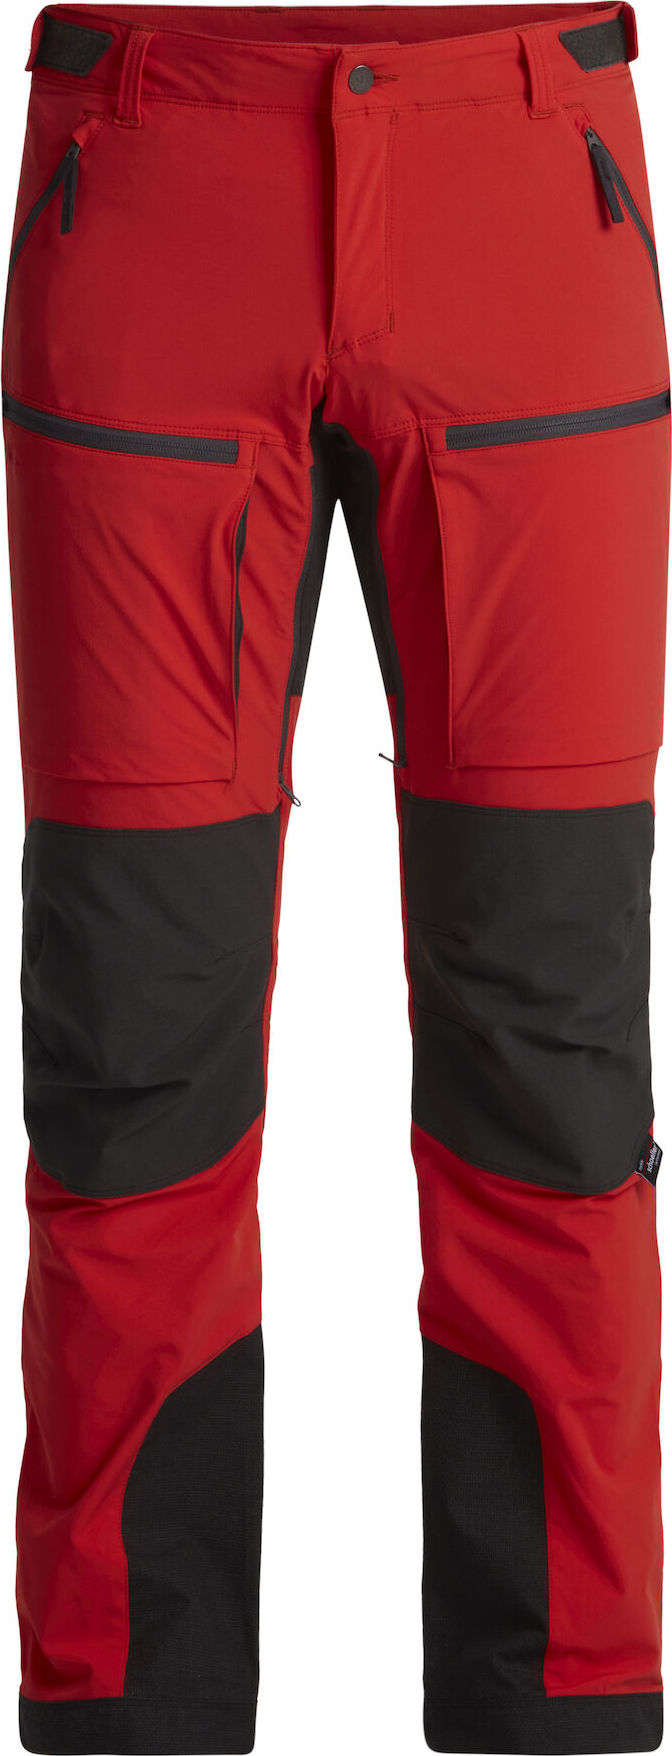 Men’s Askro Pro Pant Lively Red/Charcoal